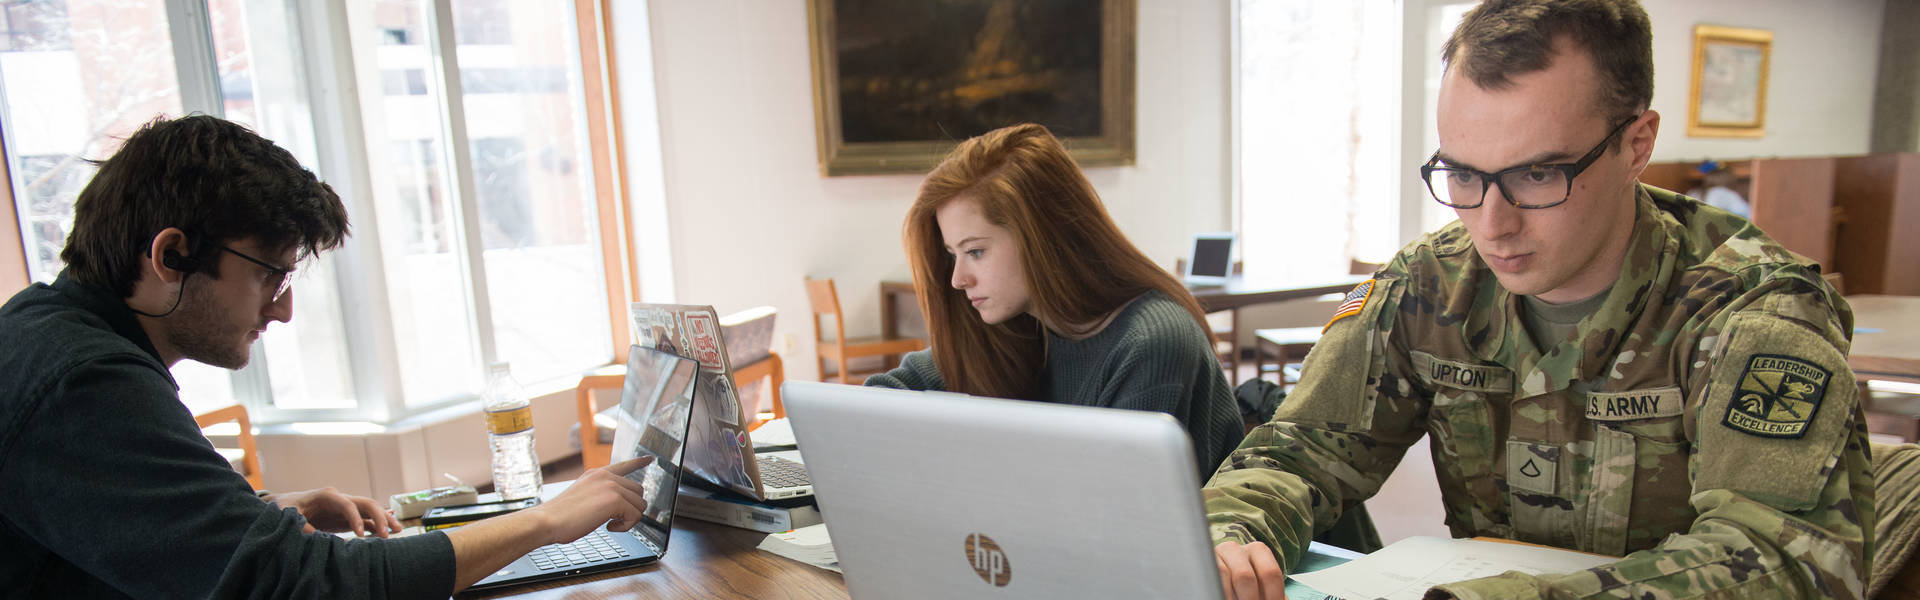 ROTC student in uniform and other students studying in the library